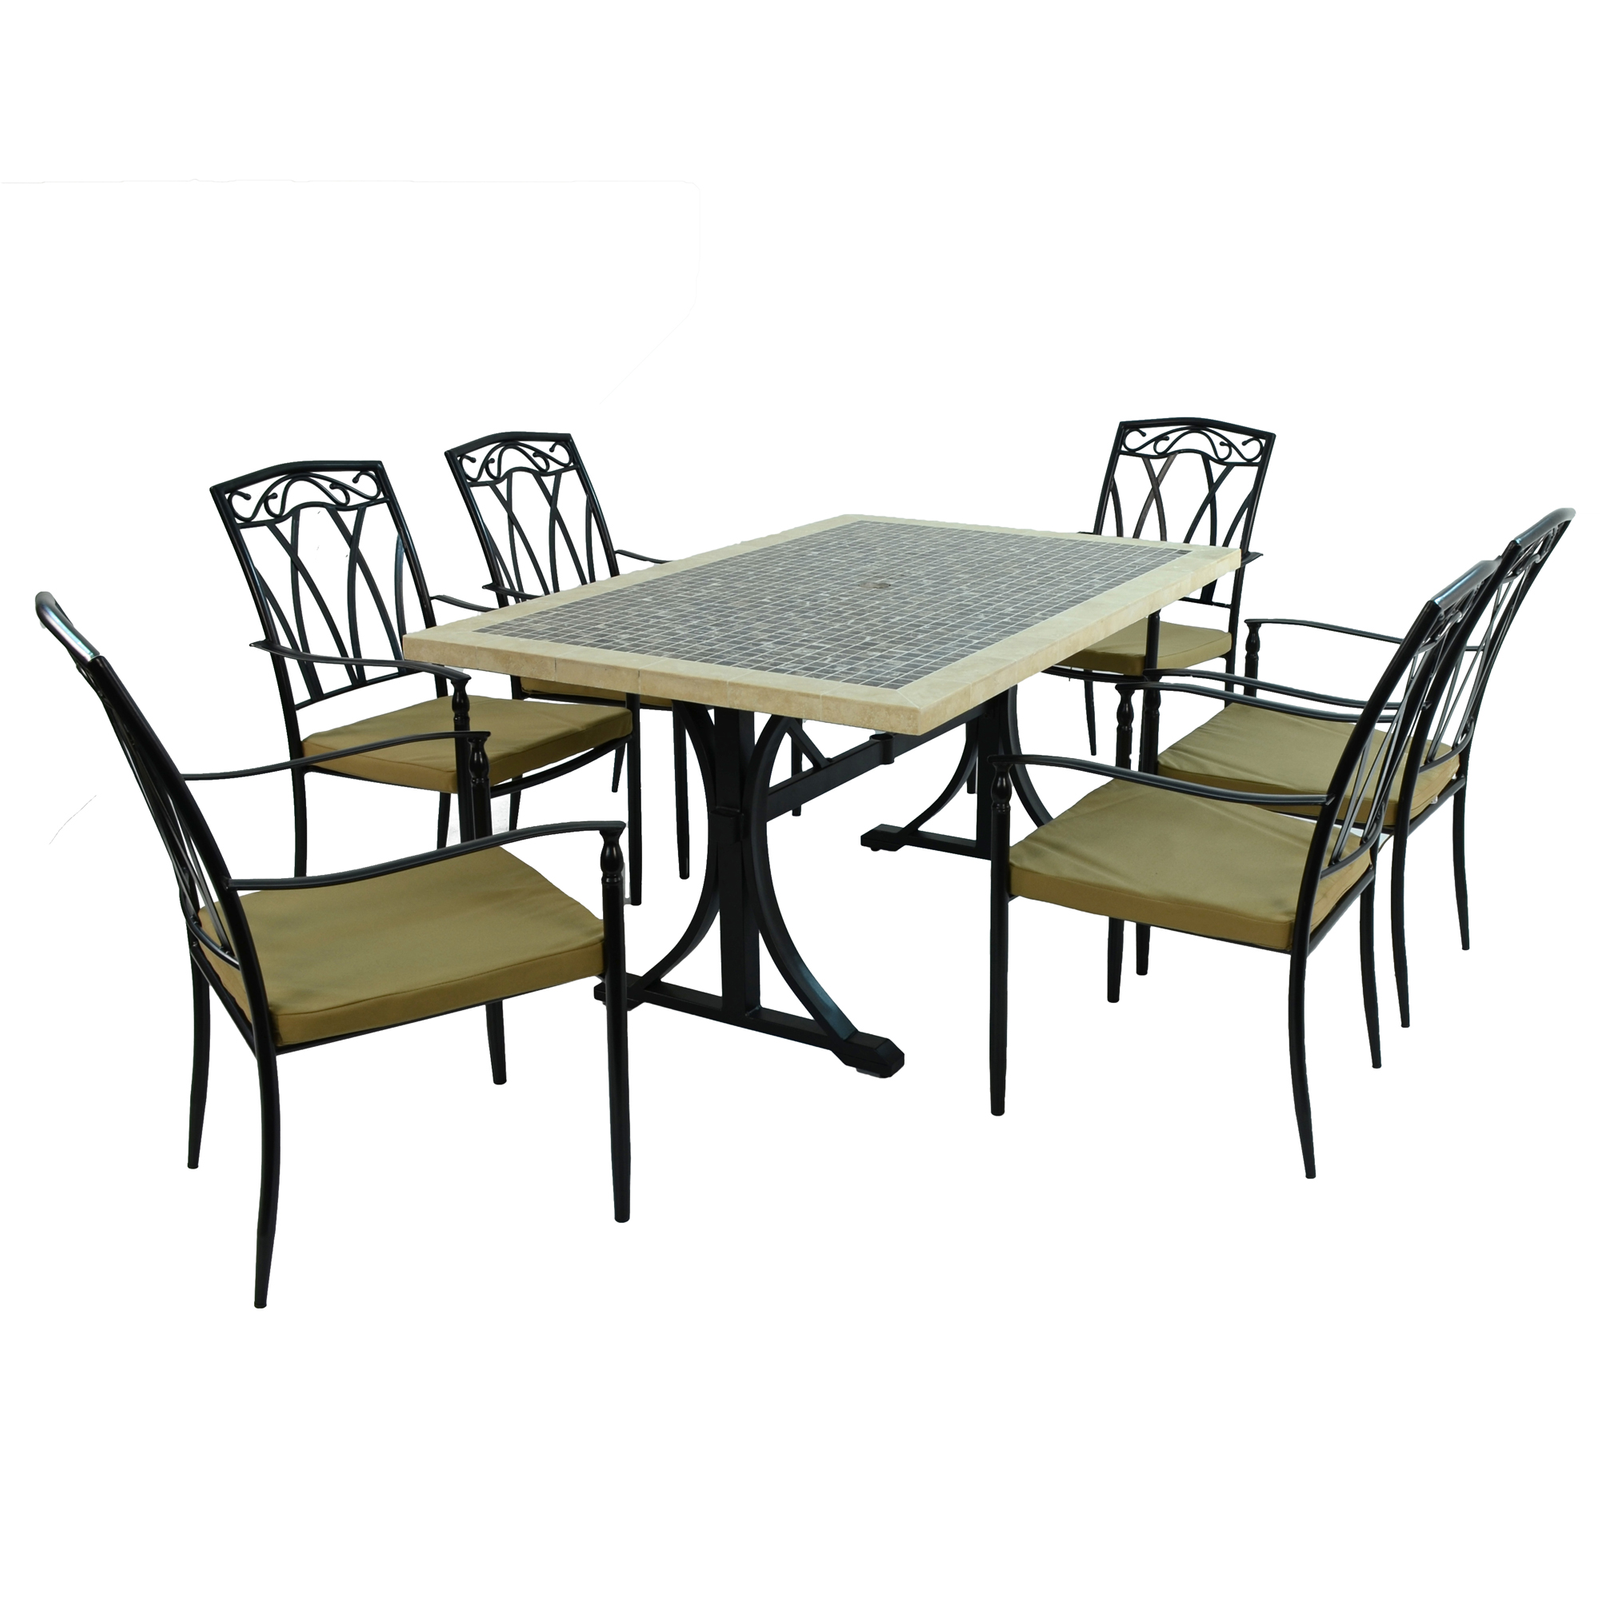 Byron Manor Wilmington Mosaic Stone Garden Dining Table With 6 Ascot Chairs Set Dining Sets Byron Manor Default Title  